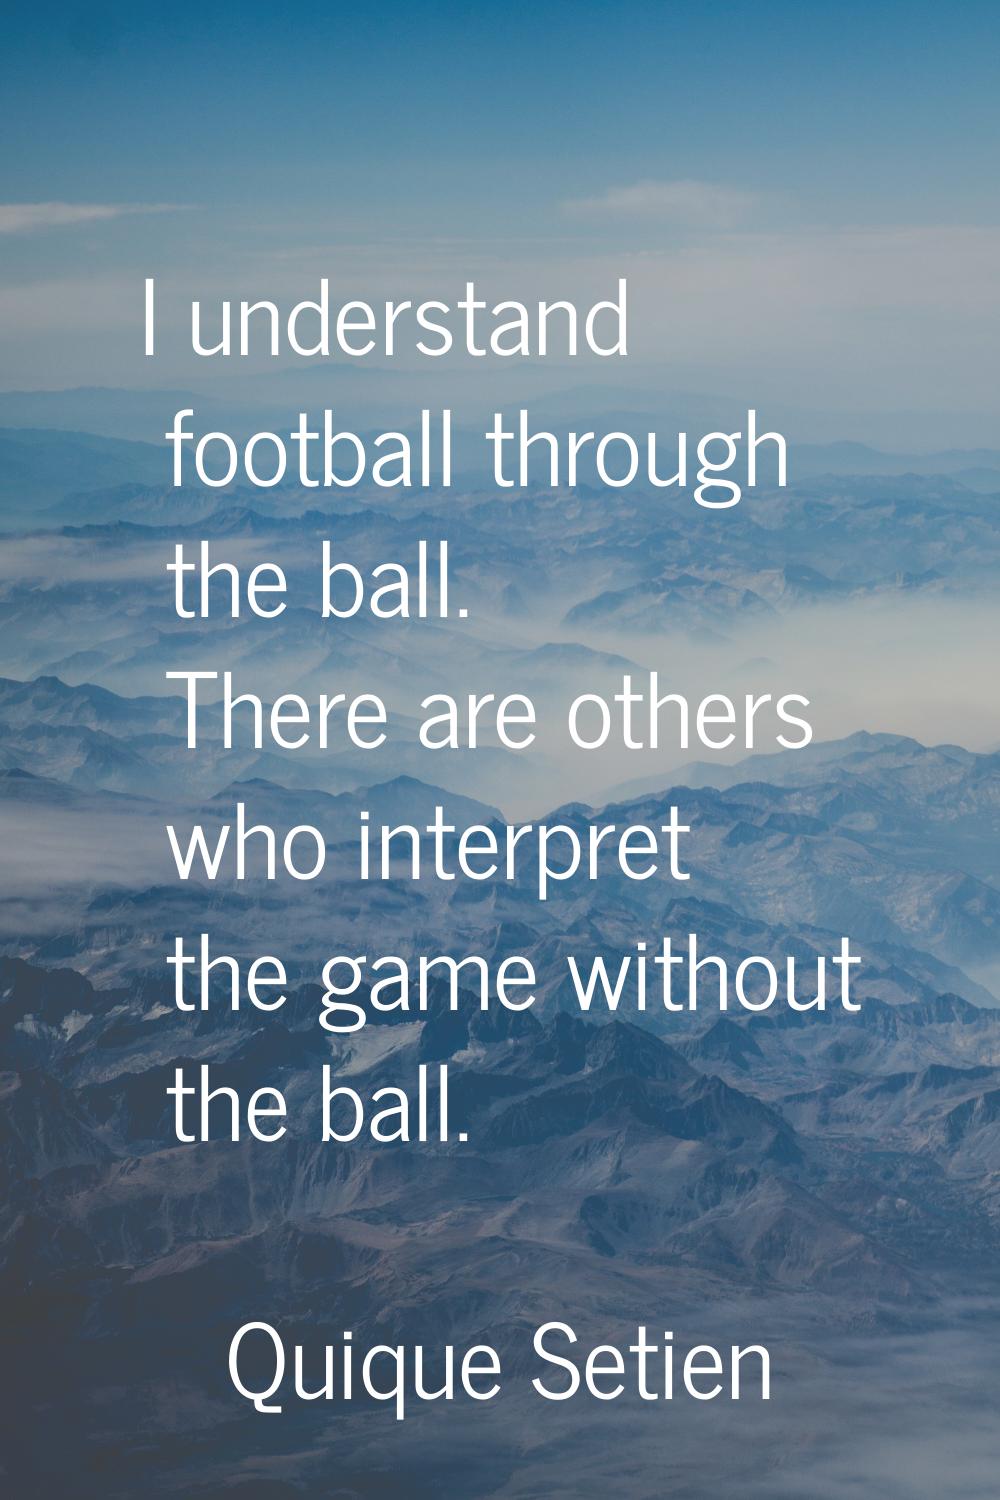 I understand football through the ball. There are others who interpret the game without the ball.